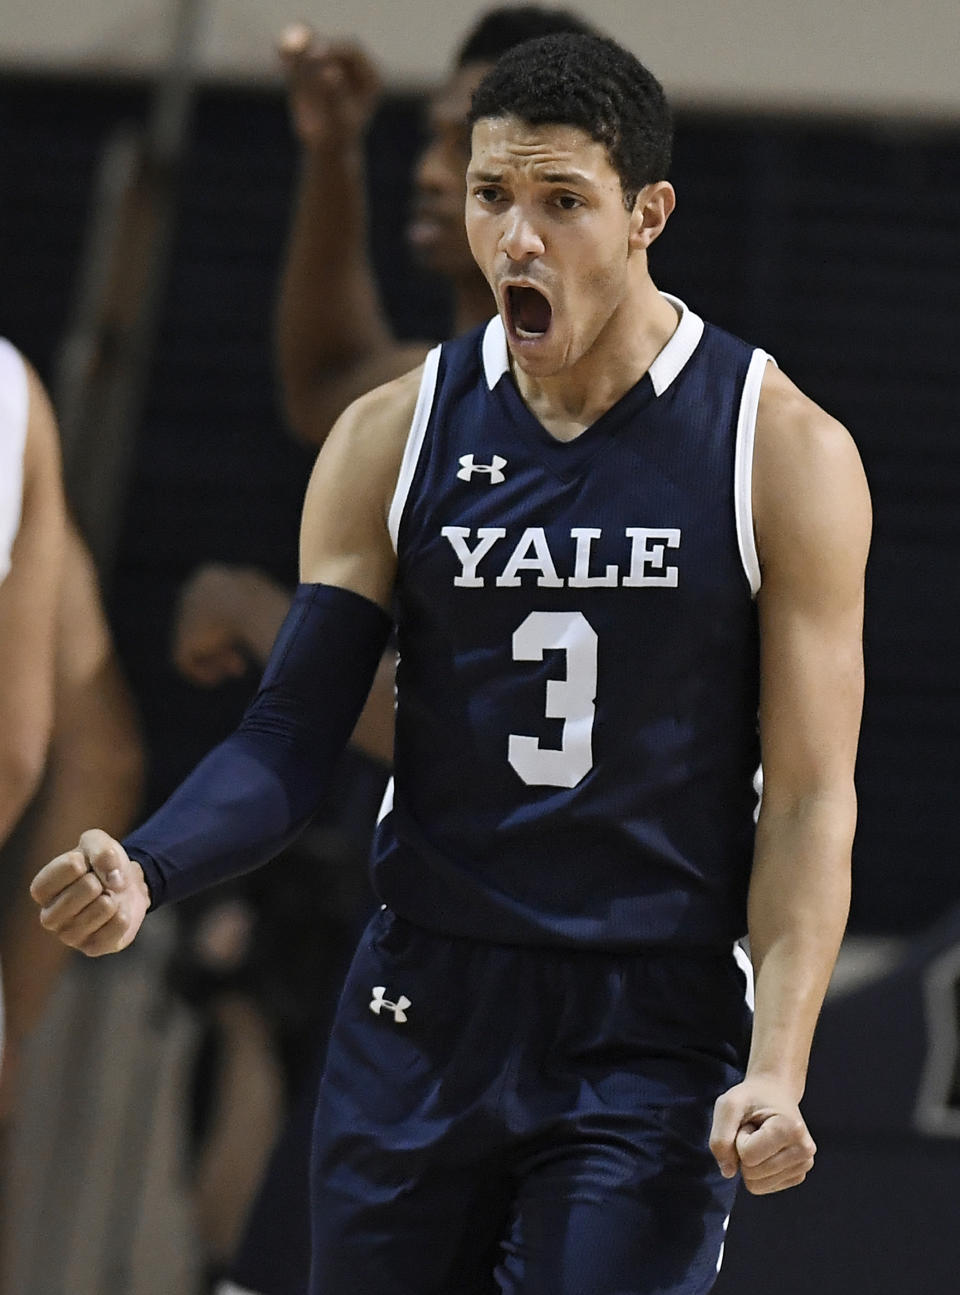 Yale's Alex Copeland reacts during the second half of an NCAA college basketball game for the Ivy League championship against Harvard at Yale University in New Haven, Conn., Sunday, March 17, 2019, in New Haven, Conn. (AP Photo/Jessica Hill)